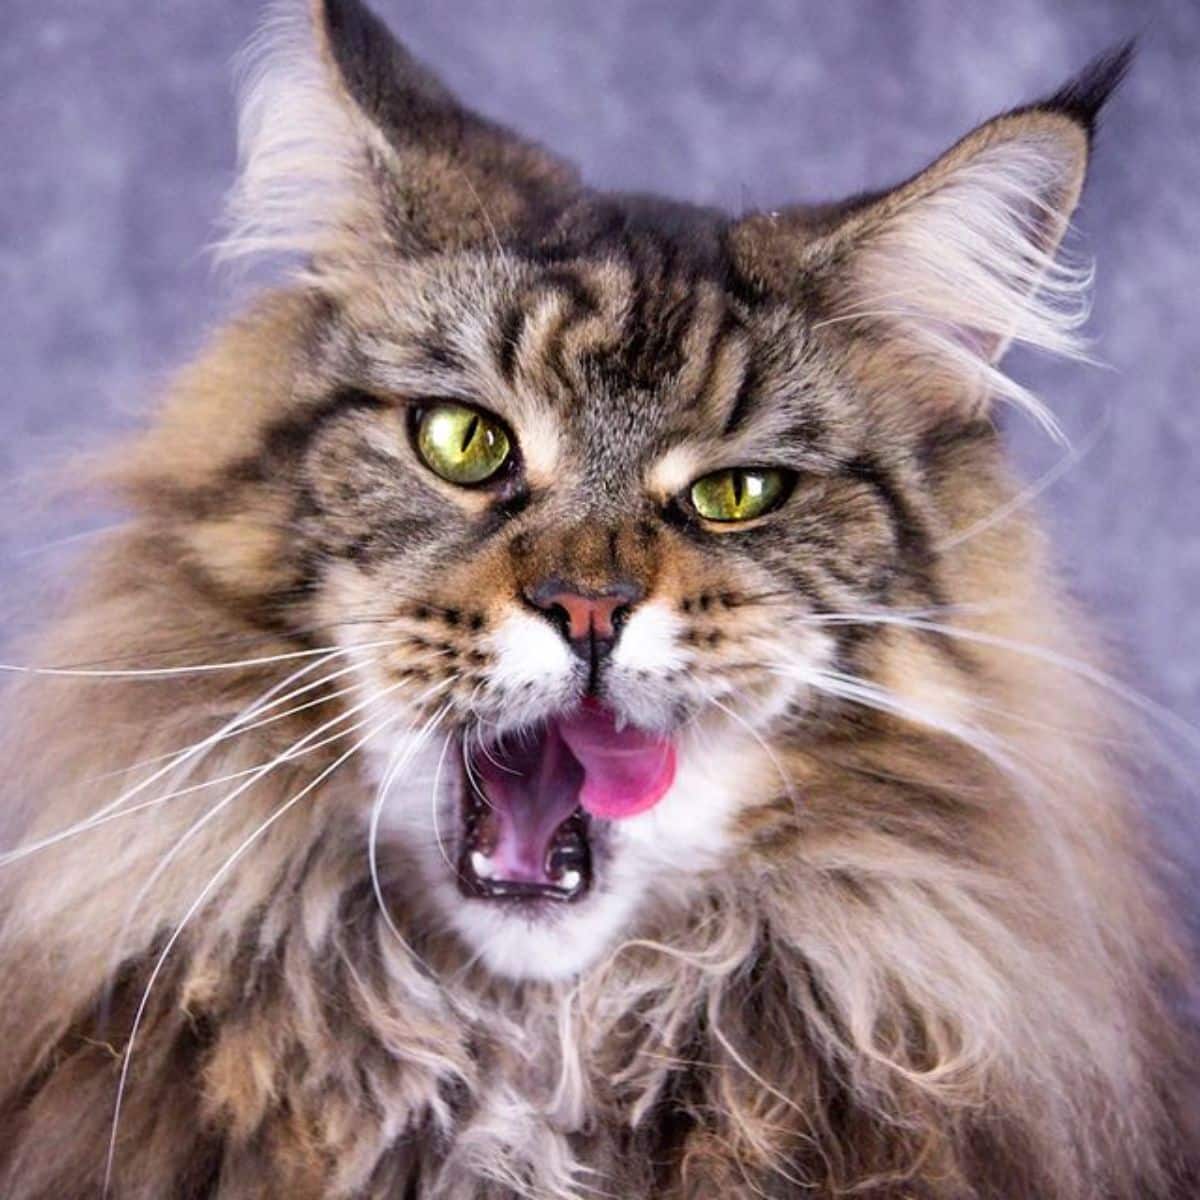 A close-up of a tabby maine coon with a tongue out.